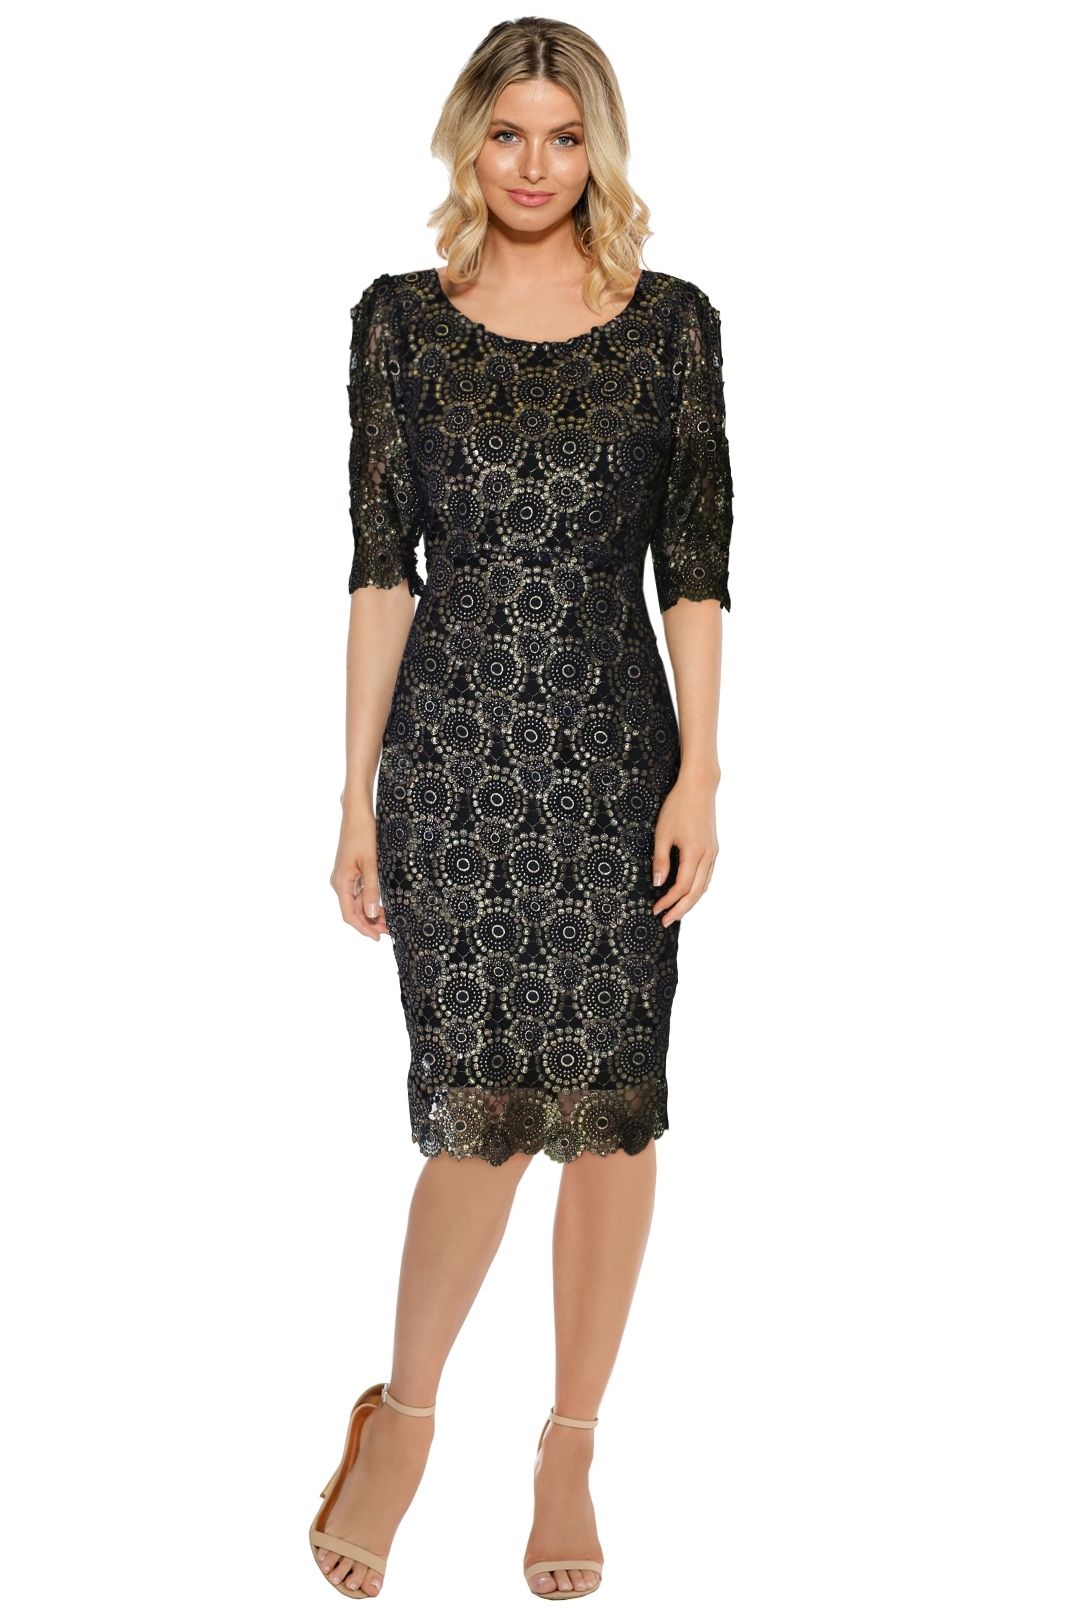 LUOM.O - High Society Dress - Black Lace - Front